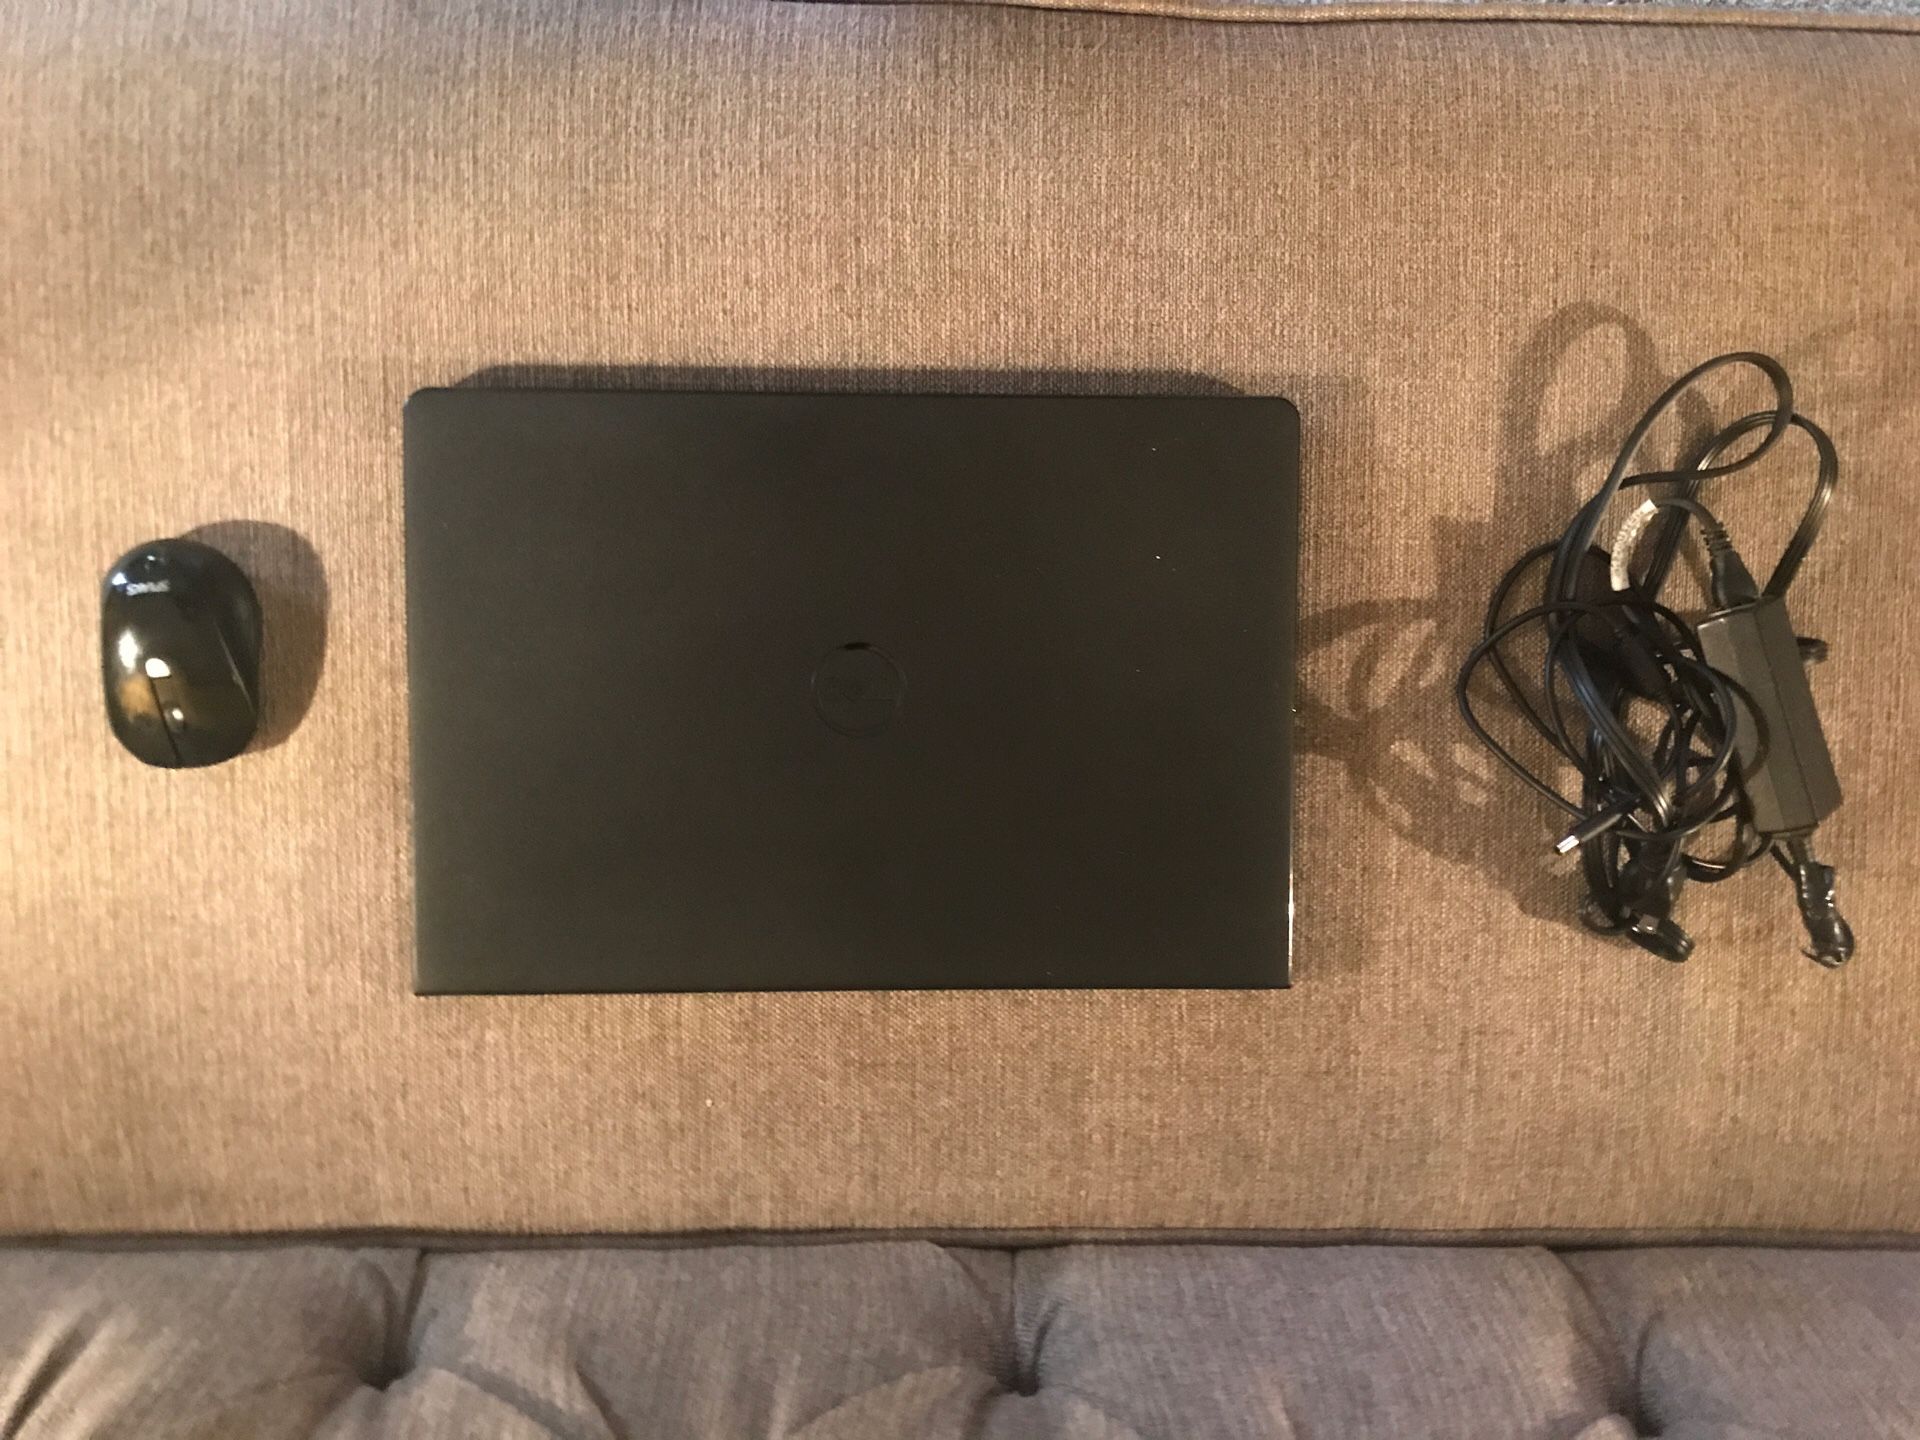 Dell Inspiron 15. With charger and mouse.